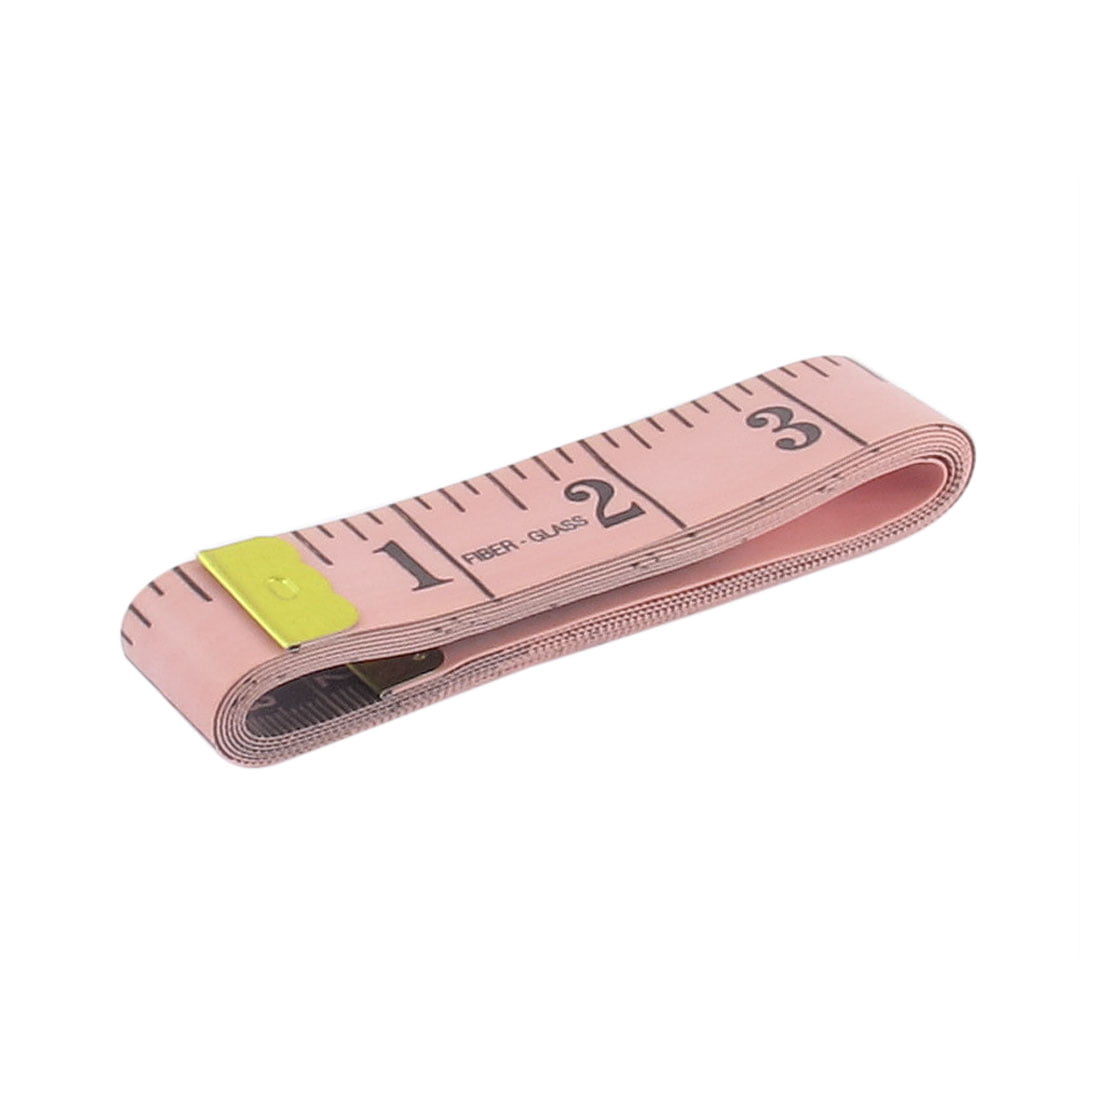 Sewing Tailor Dieting Cloth Measure Tool Soft Flat Ruler Tape Pink 1.5M 60" 